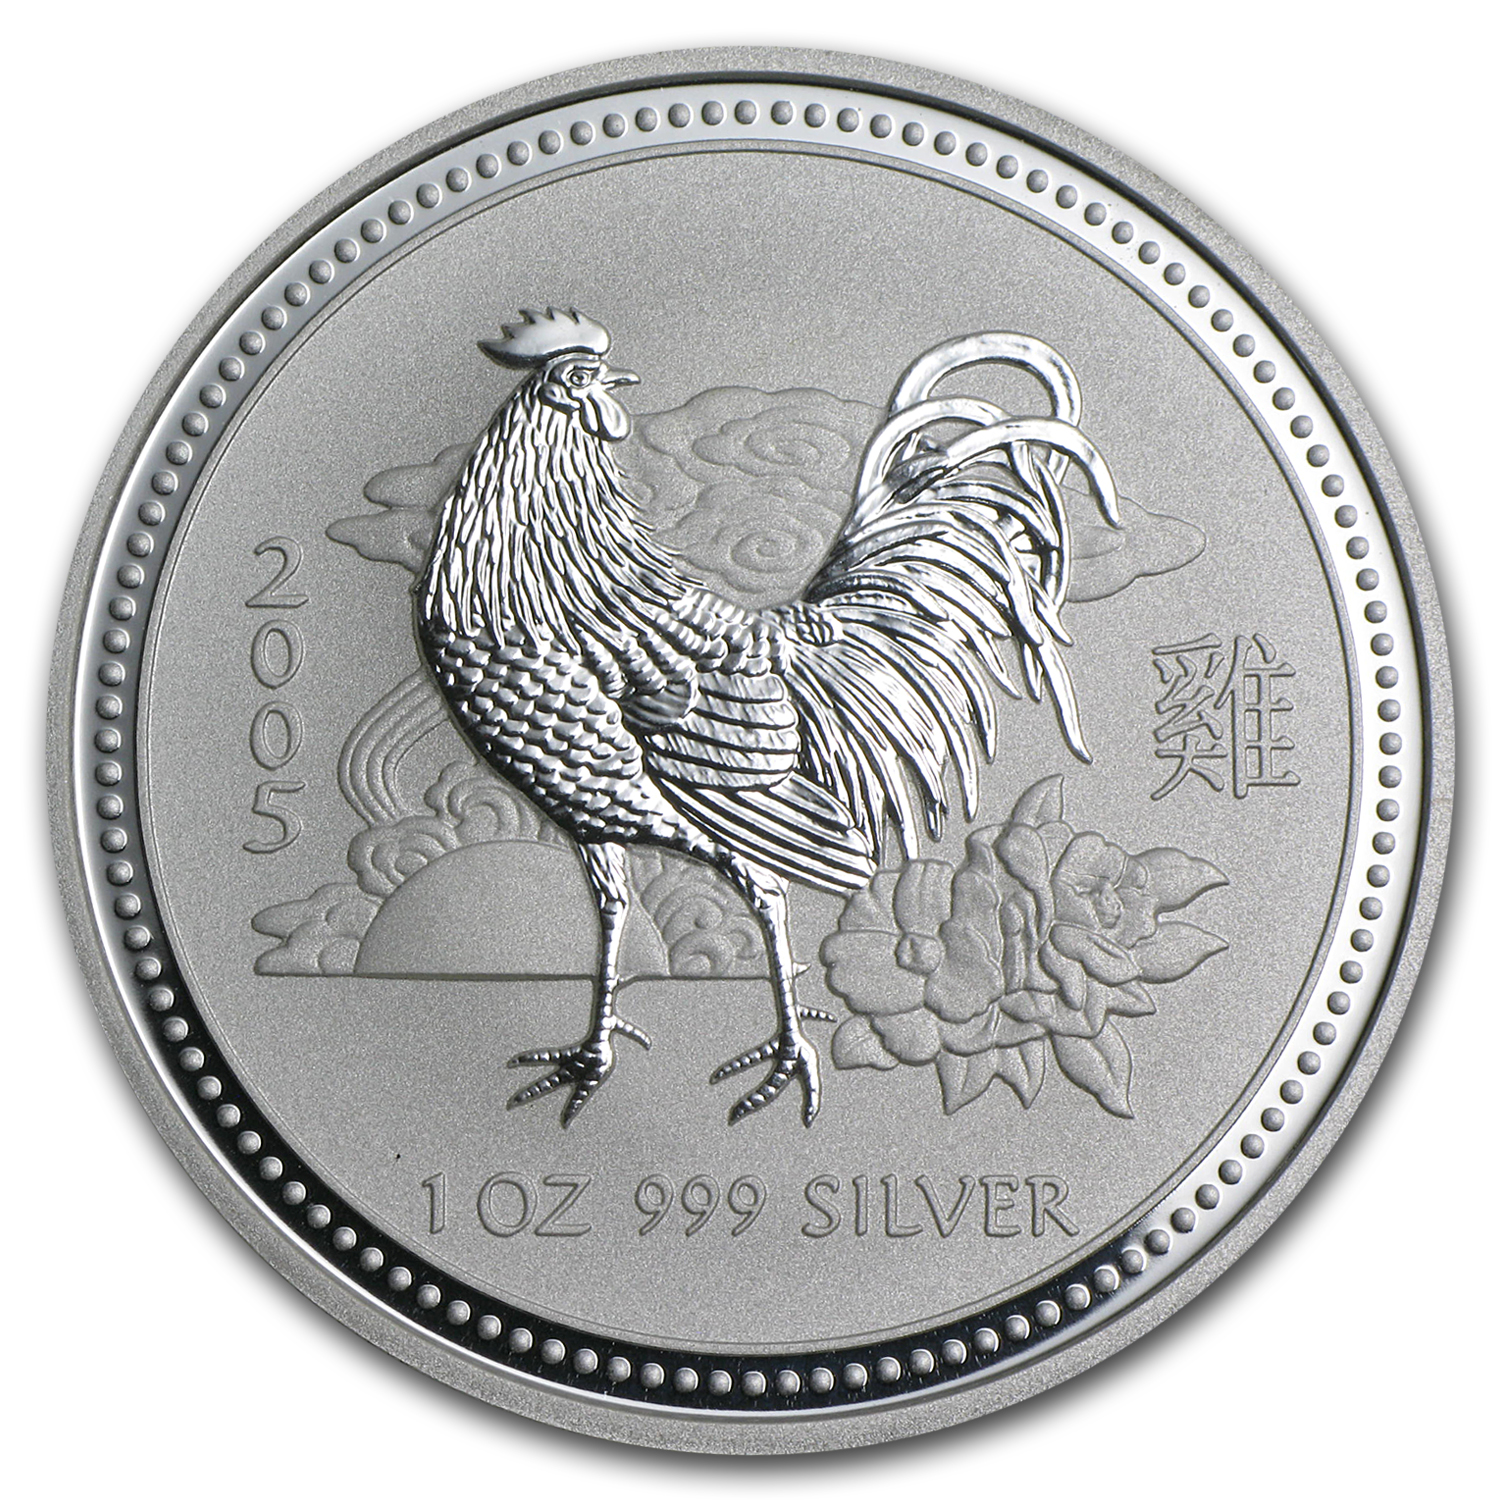 Buy 2005 Australia 1 oz Silver Year of the Rooster BU (Series I)